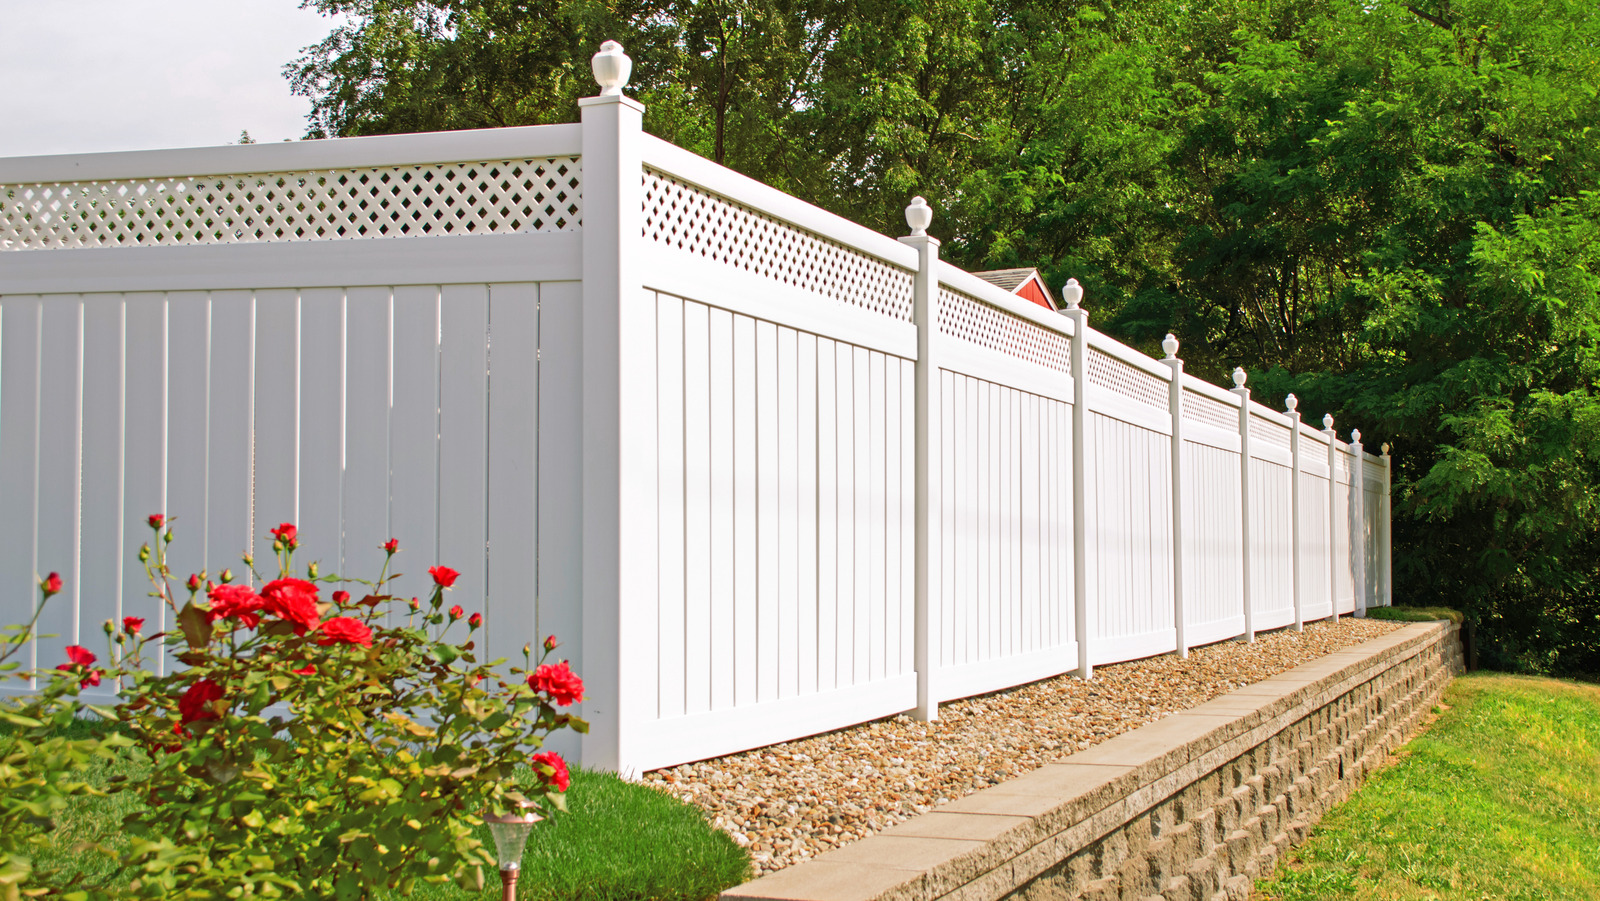 Fence Daddy Vinyl Fence Repair Kit in White